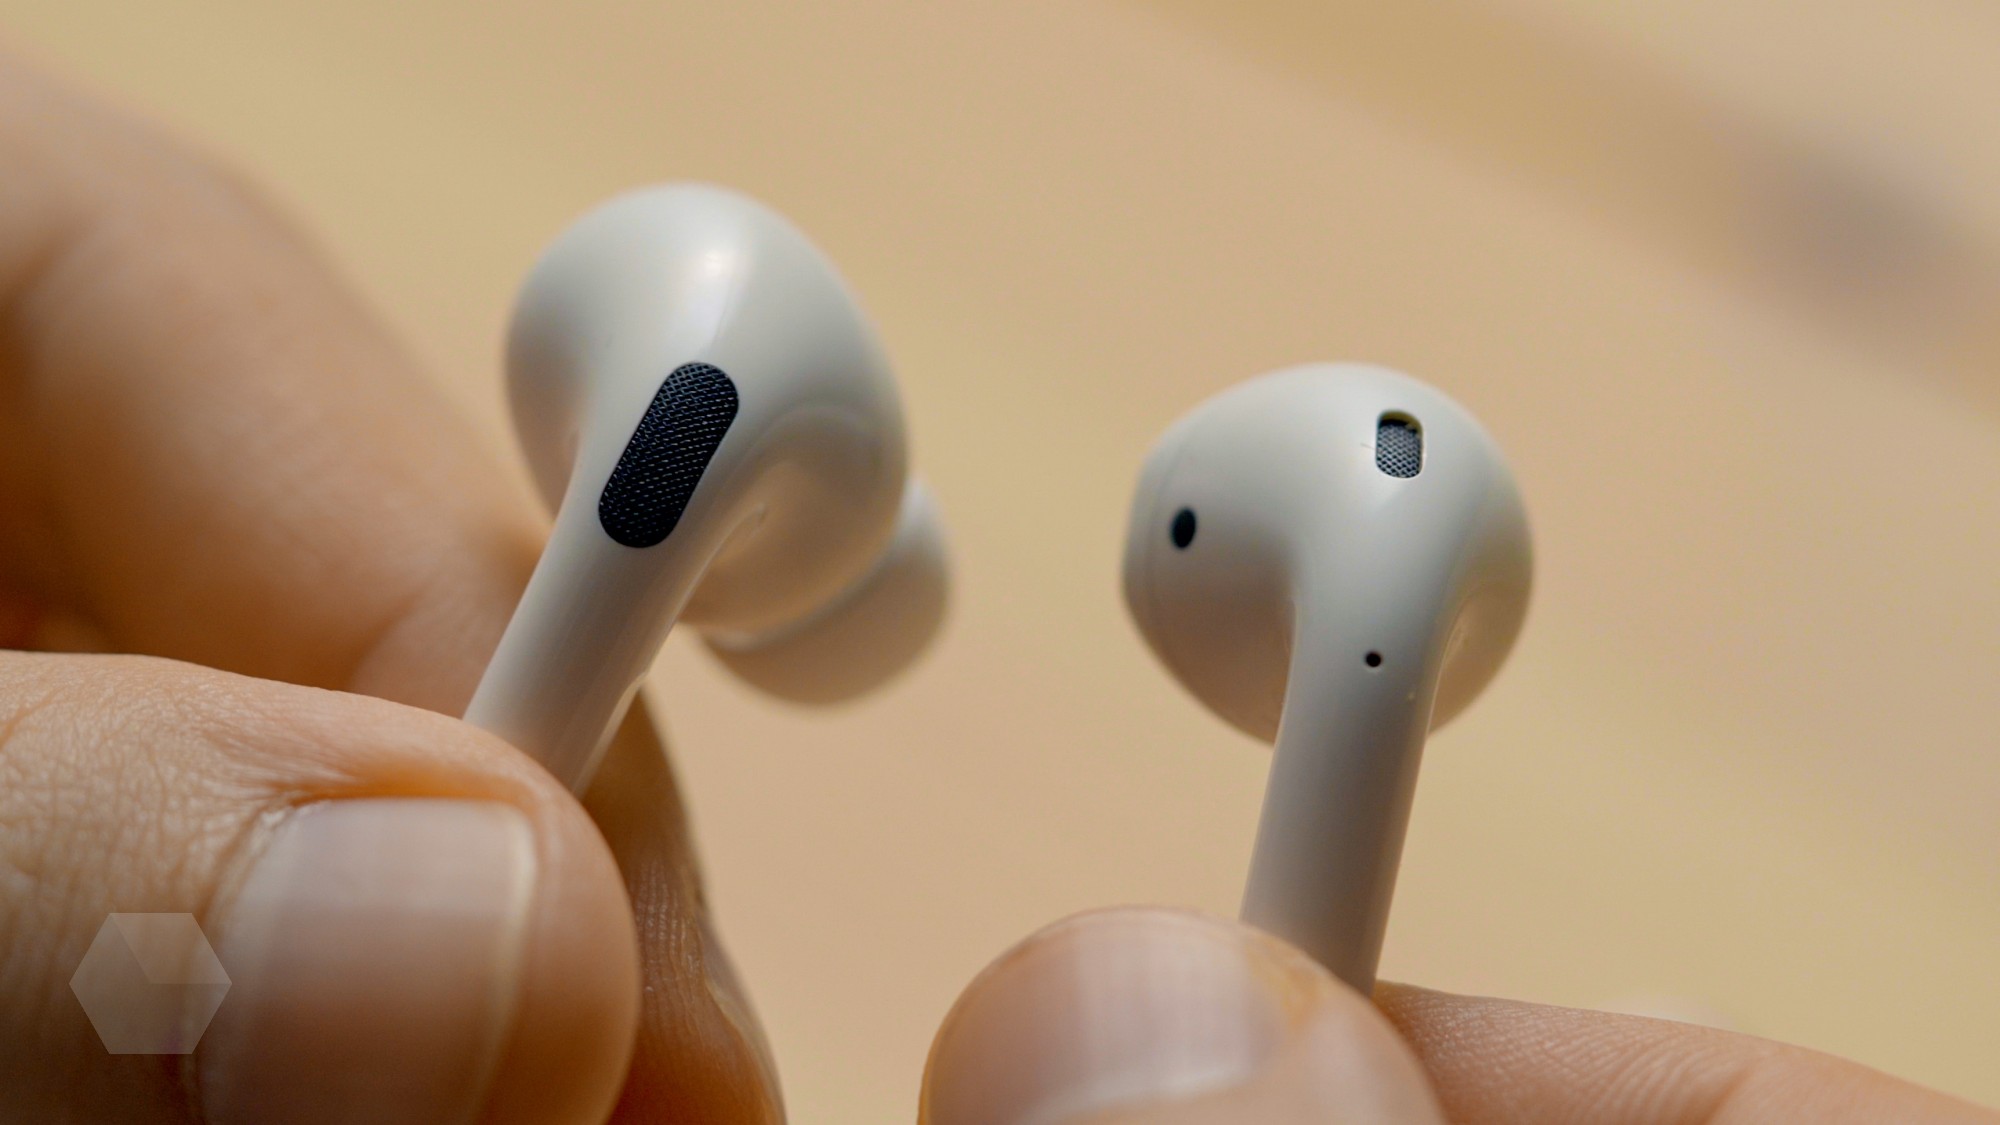 Airpods pro разъем. Наушники Apple Earpods Pro 2. Левый наушник Apple AIRPODS 2. Эйрподс 3. AIRPODS Pro 3.